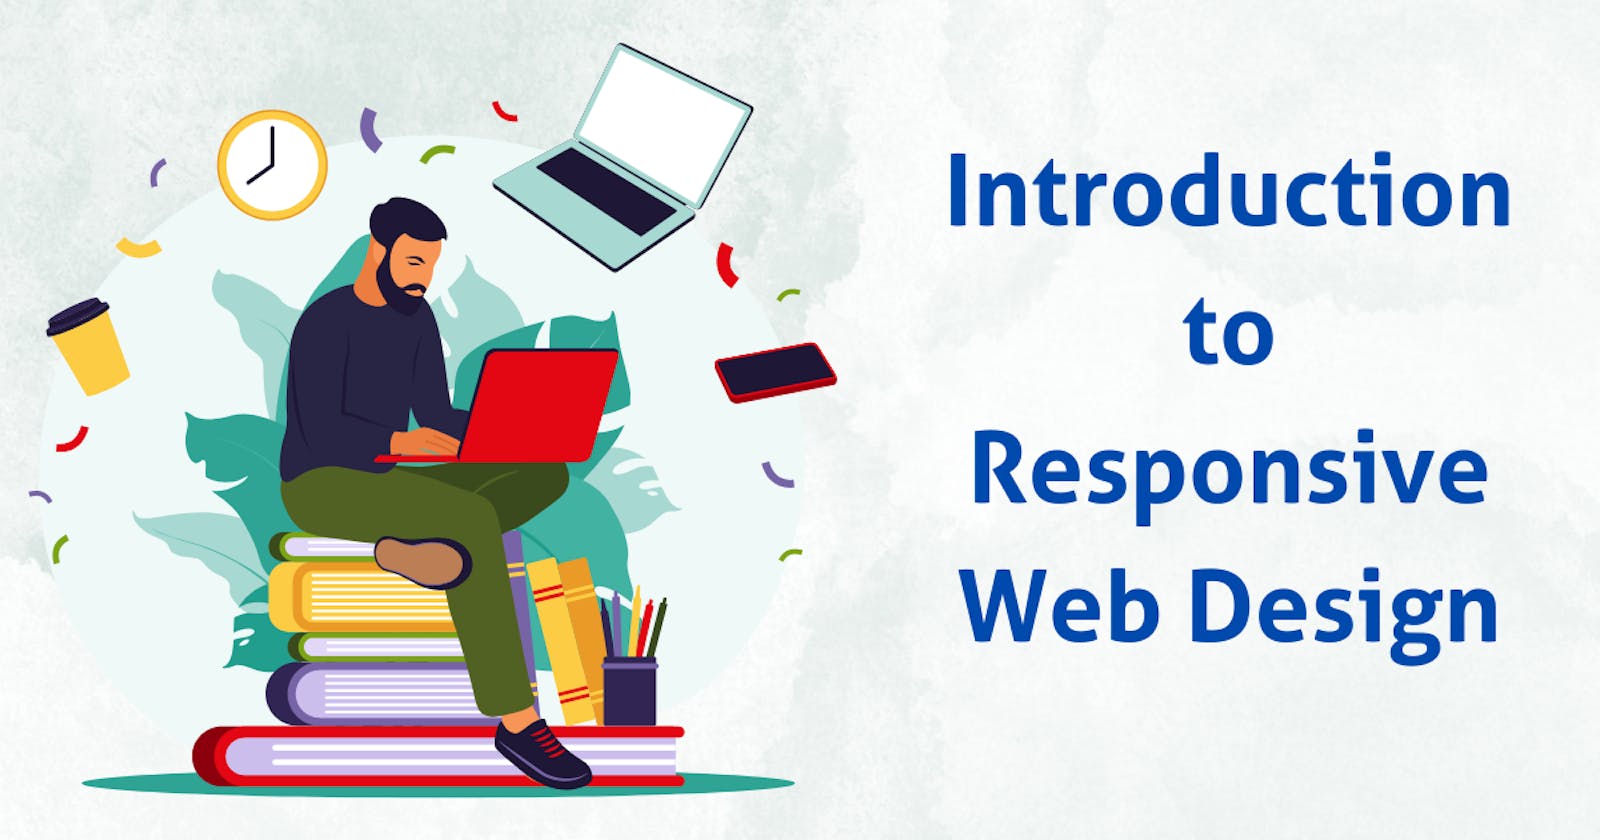 Introduction to Responsive Web Design: Building mobile-friendly websites.